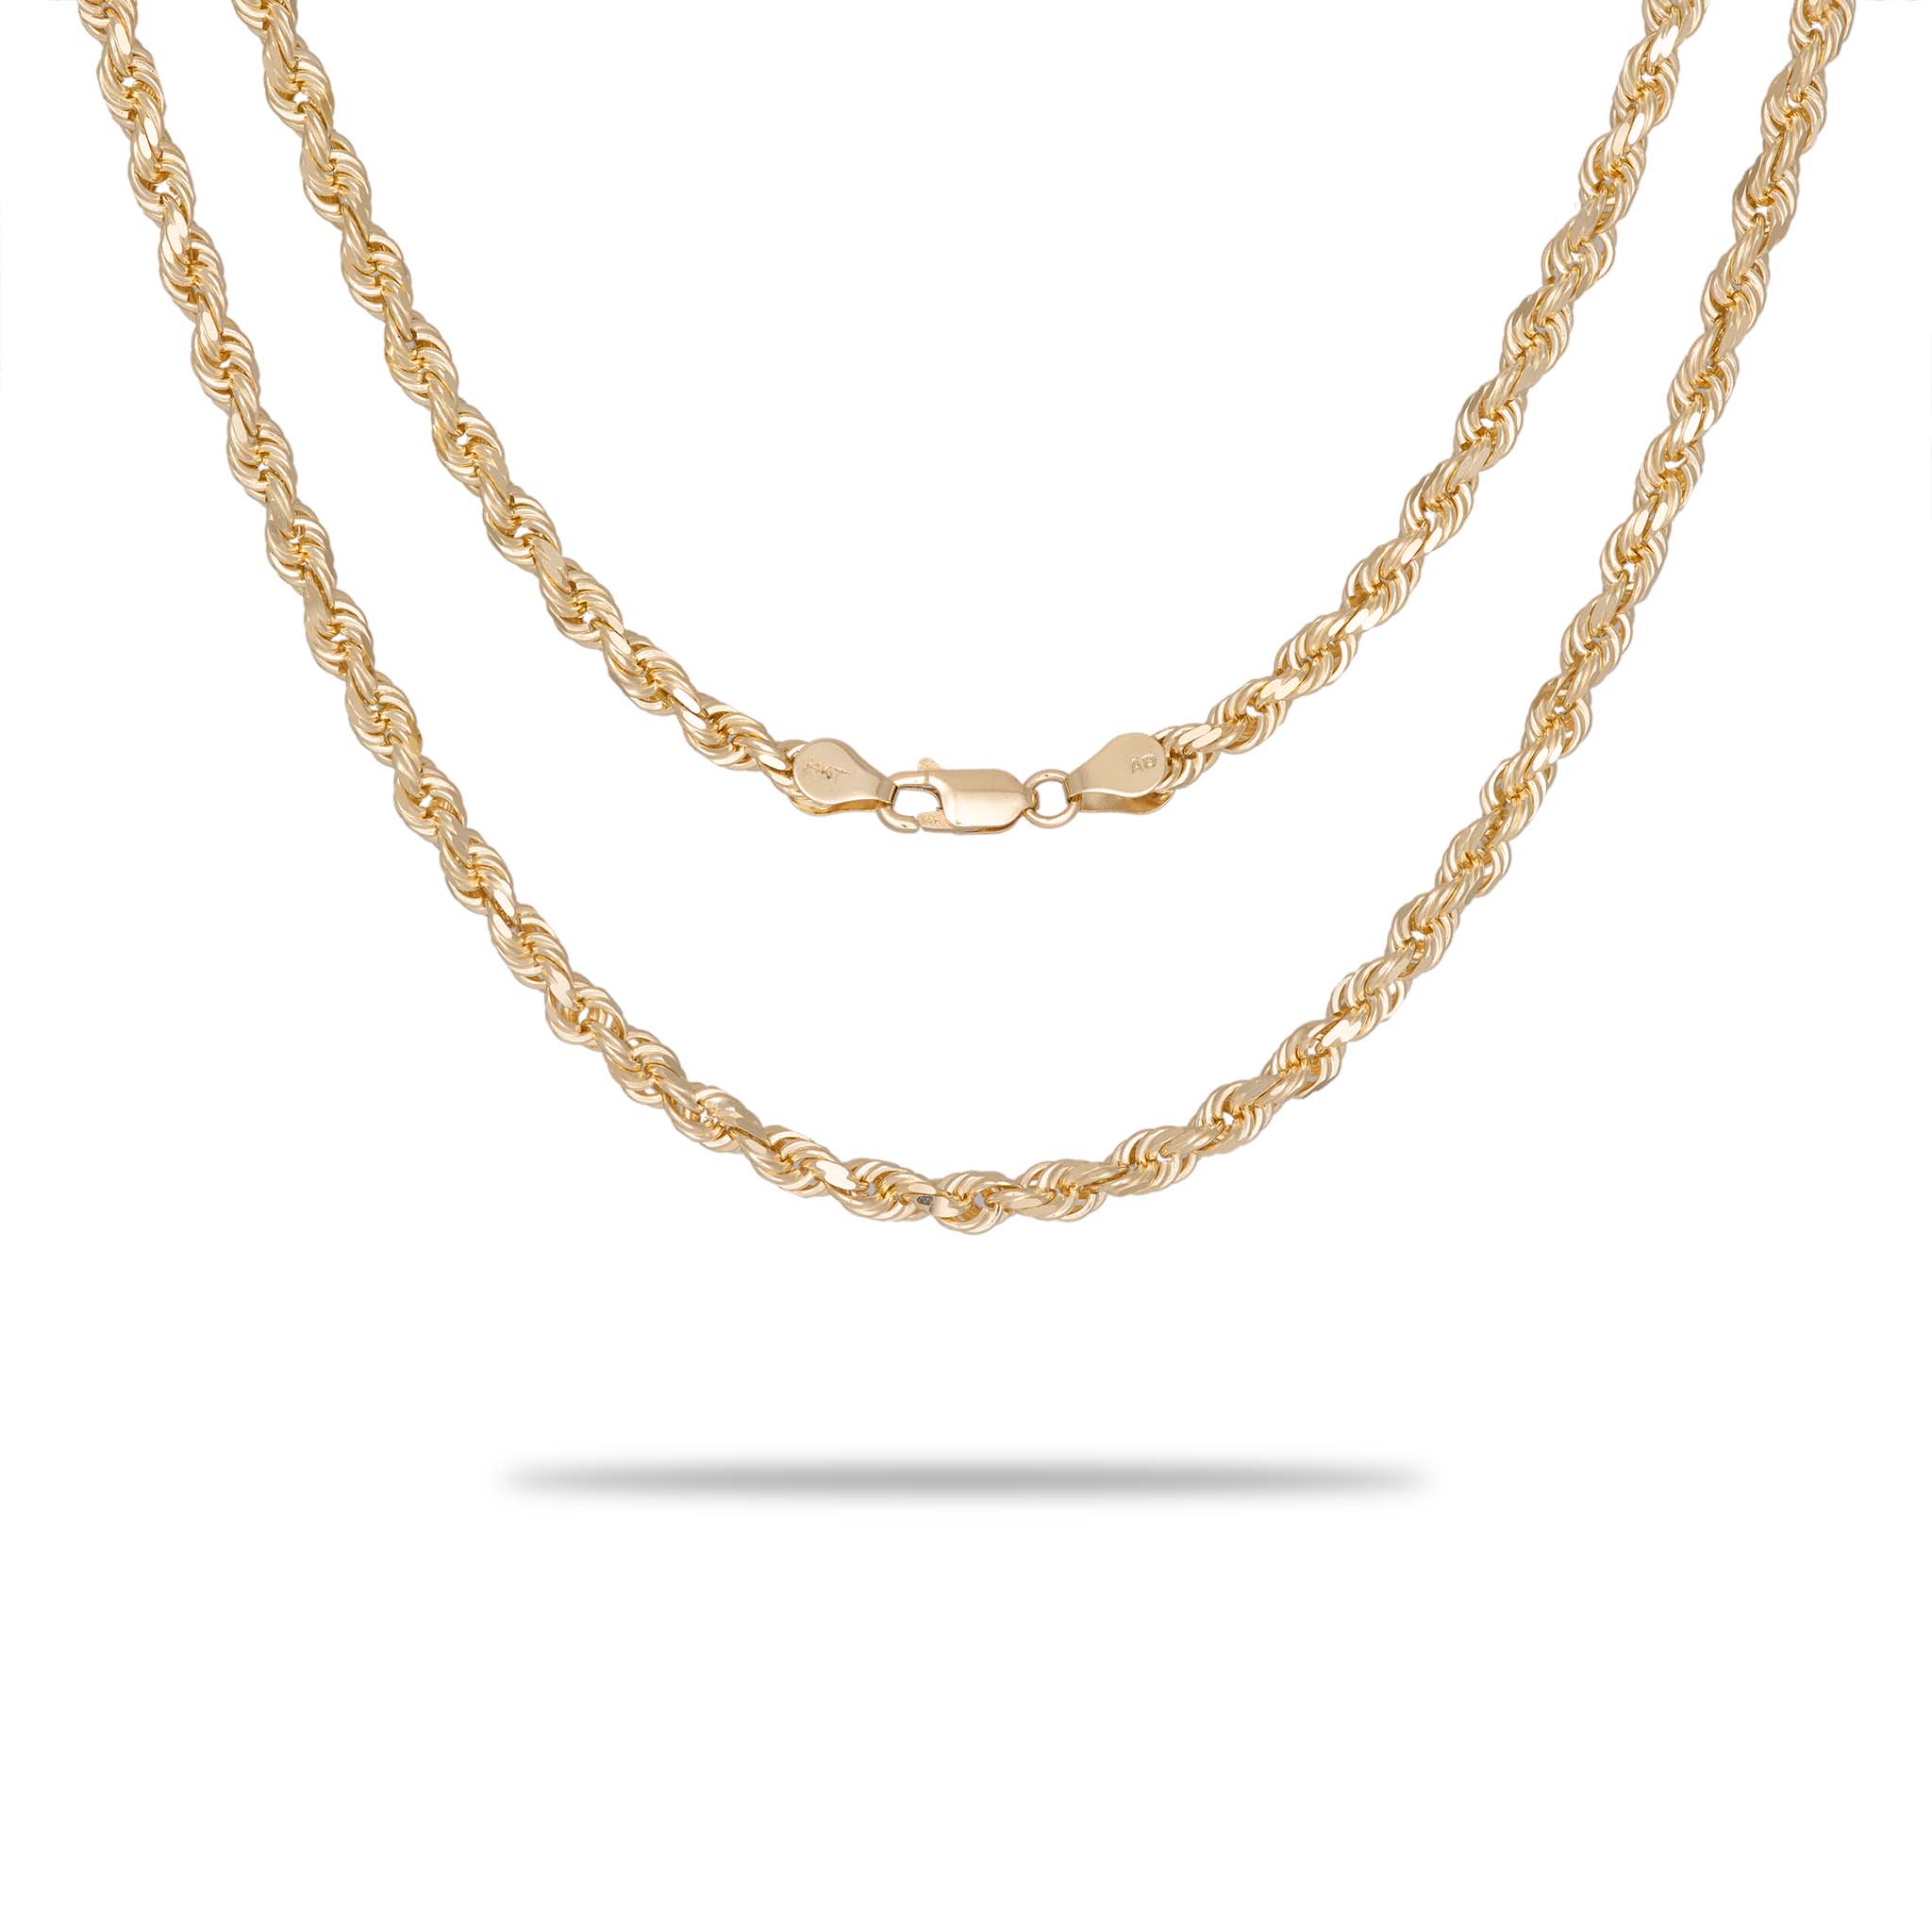 5mm Rope Chain in Gold - Maui Divers Jewelry